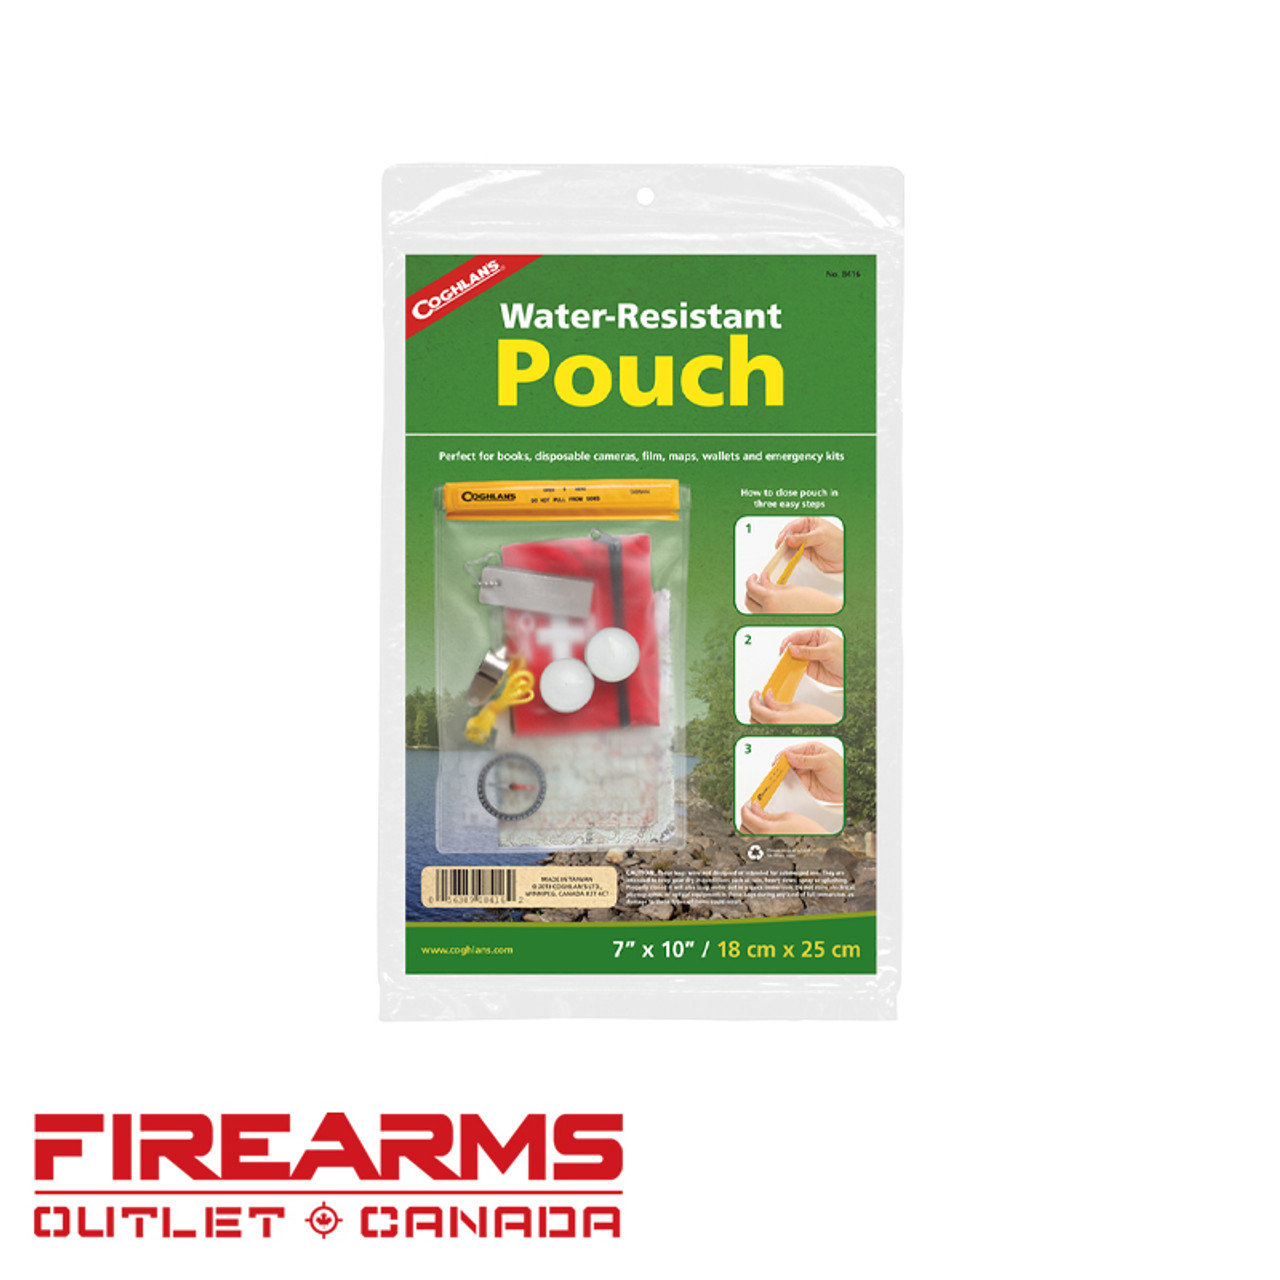 Coghlan's Water-Resistant Pouch - 7" x 10" [8416]